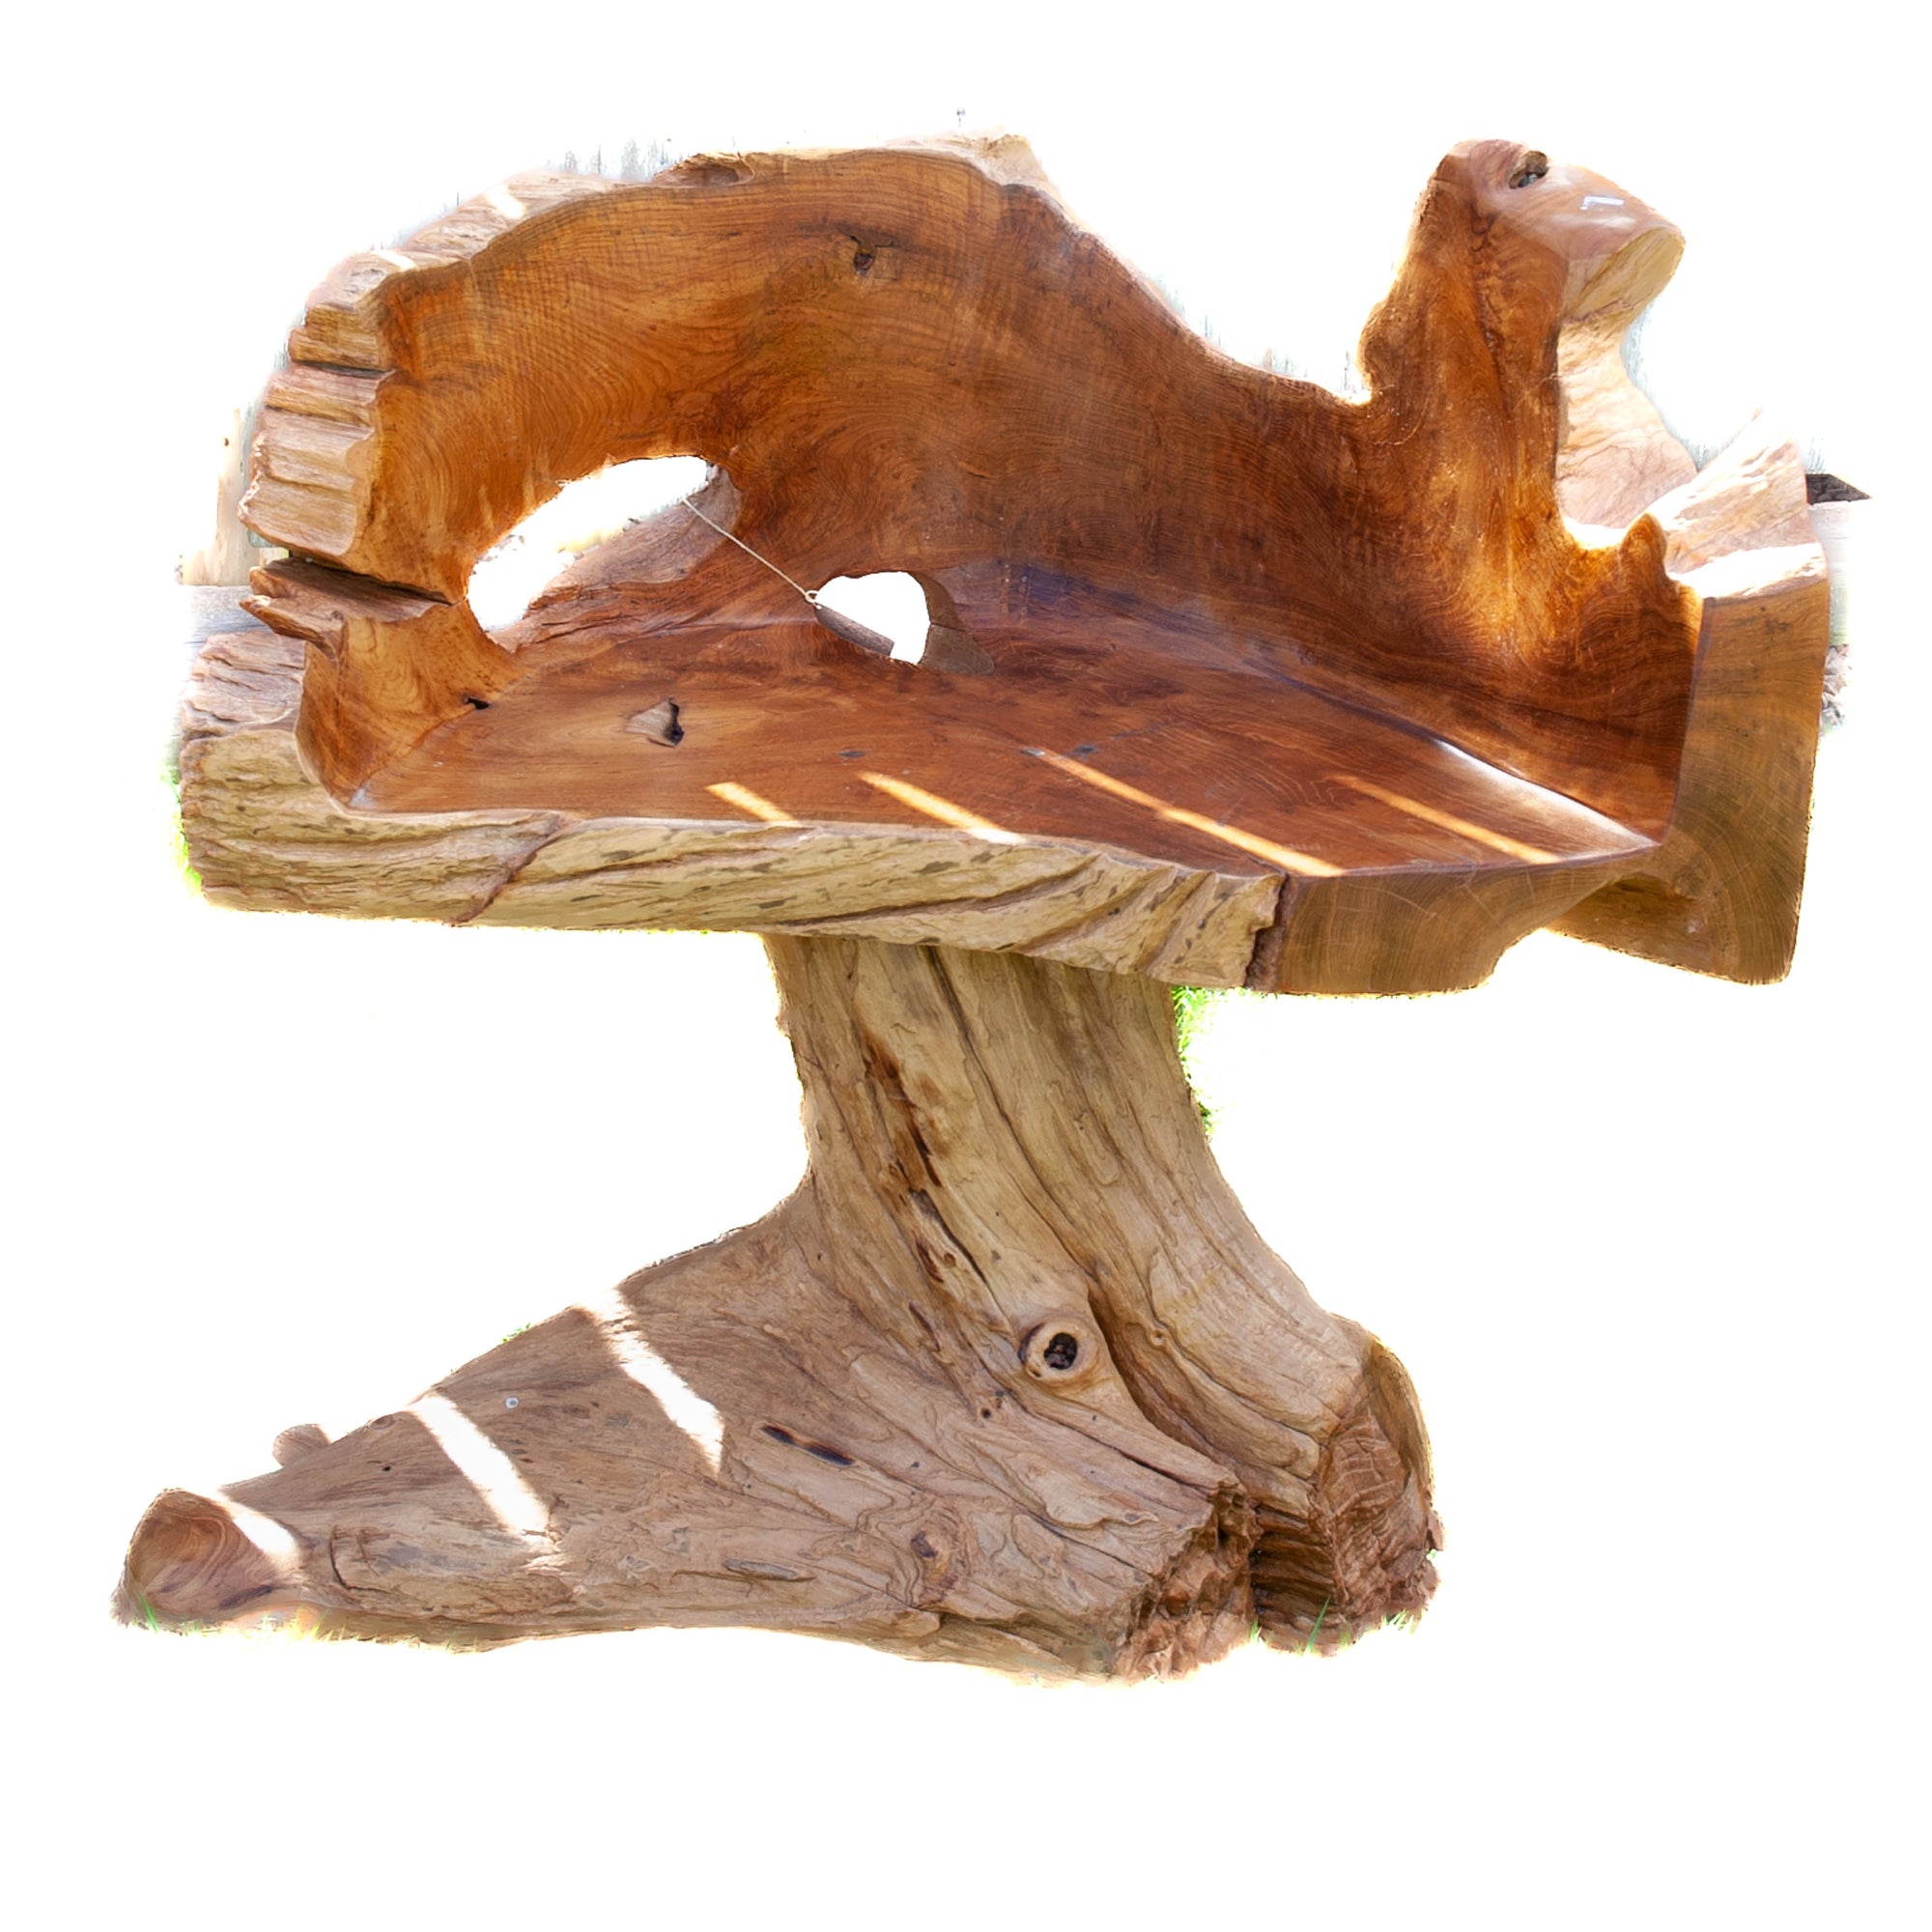 A natural teak wood chair, heavy looking, like it was carved from a tree stump